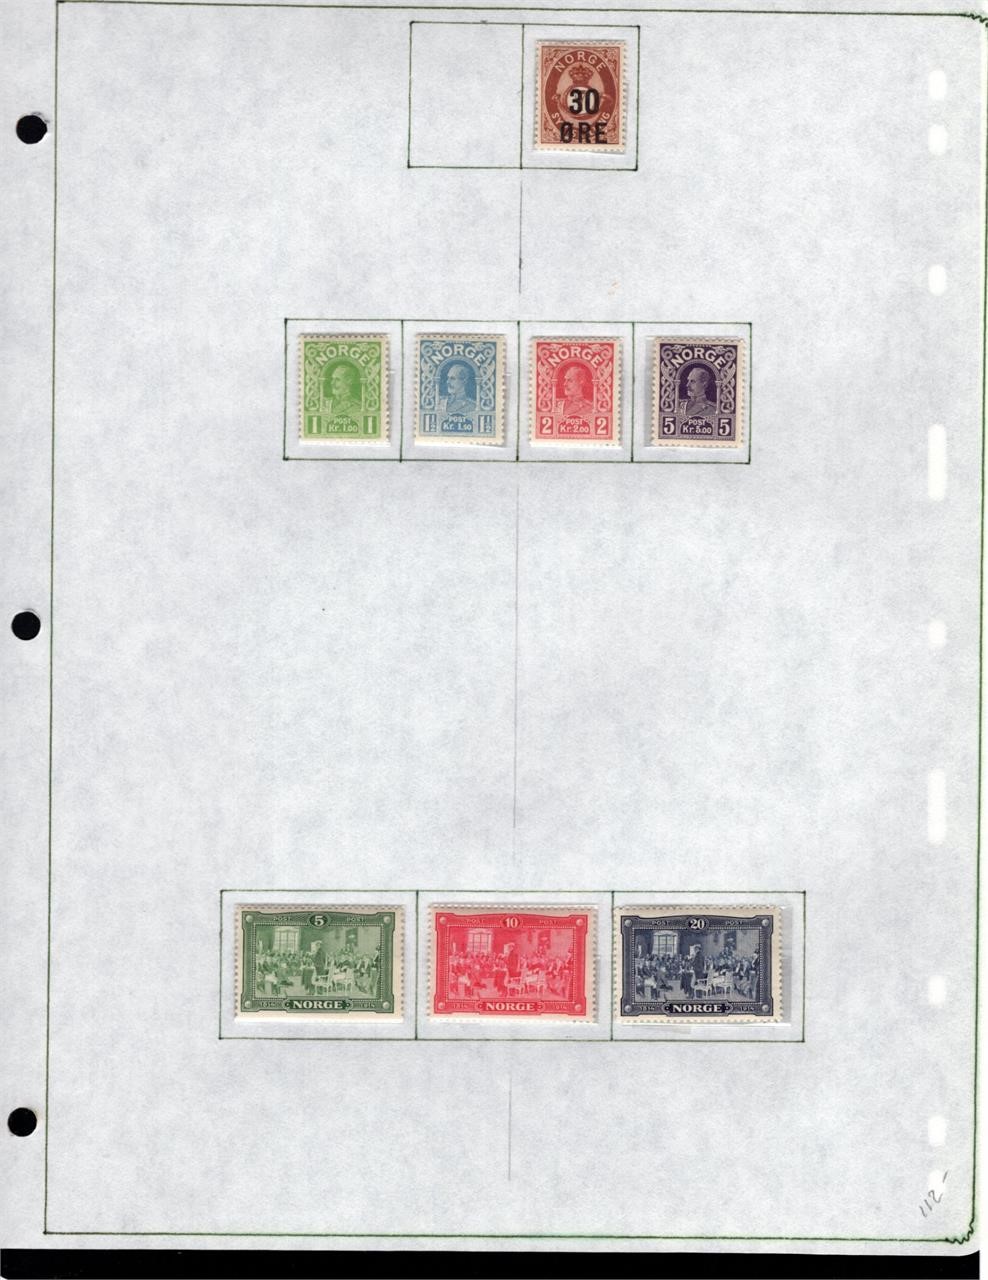 NORWAY COLLECTION - MINT - $2,700.00